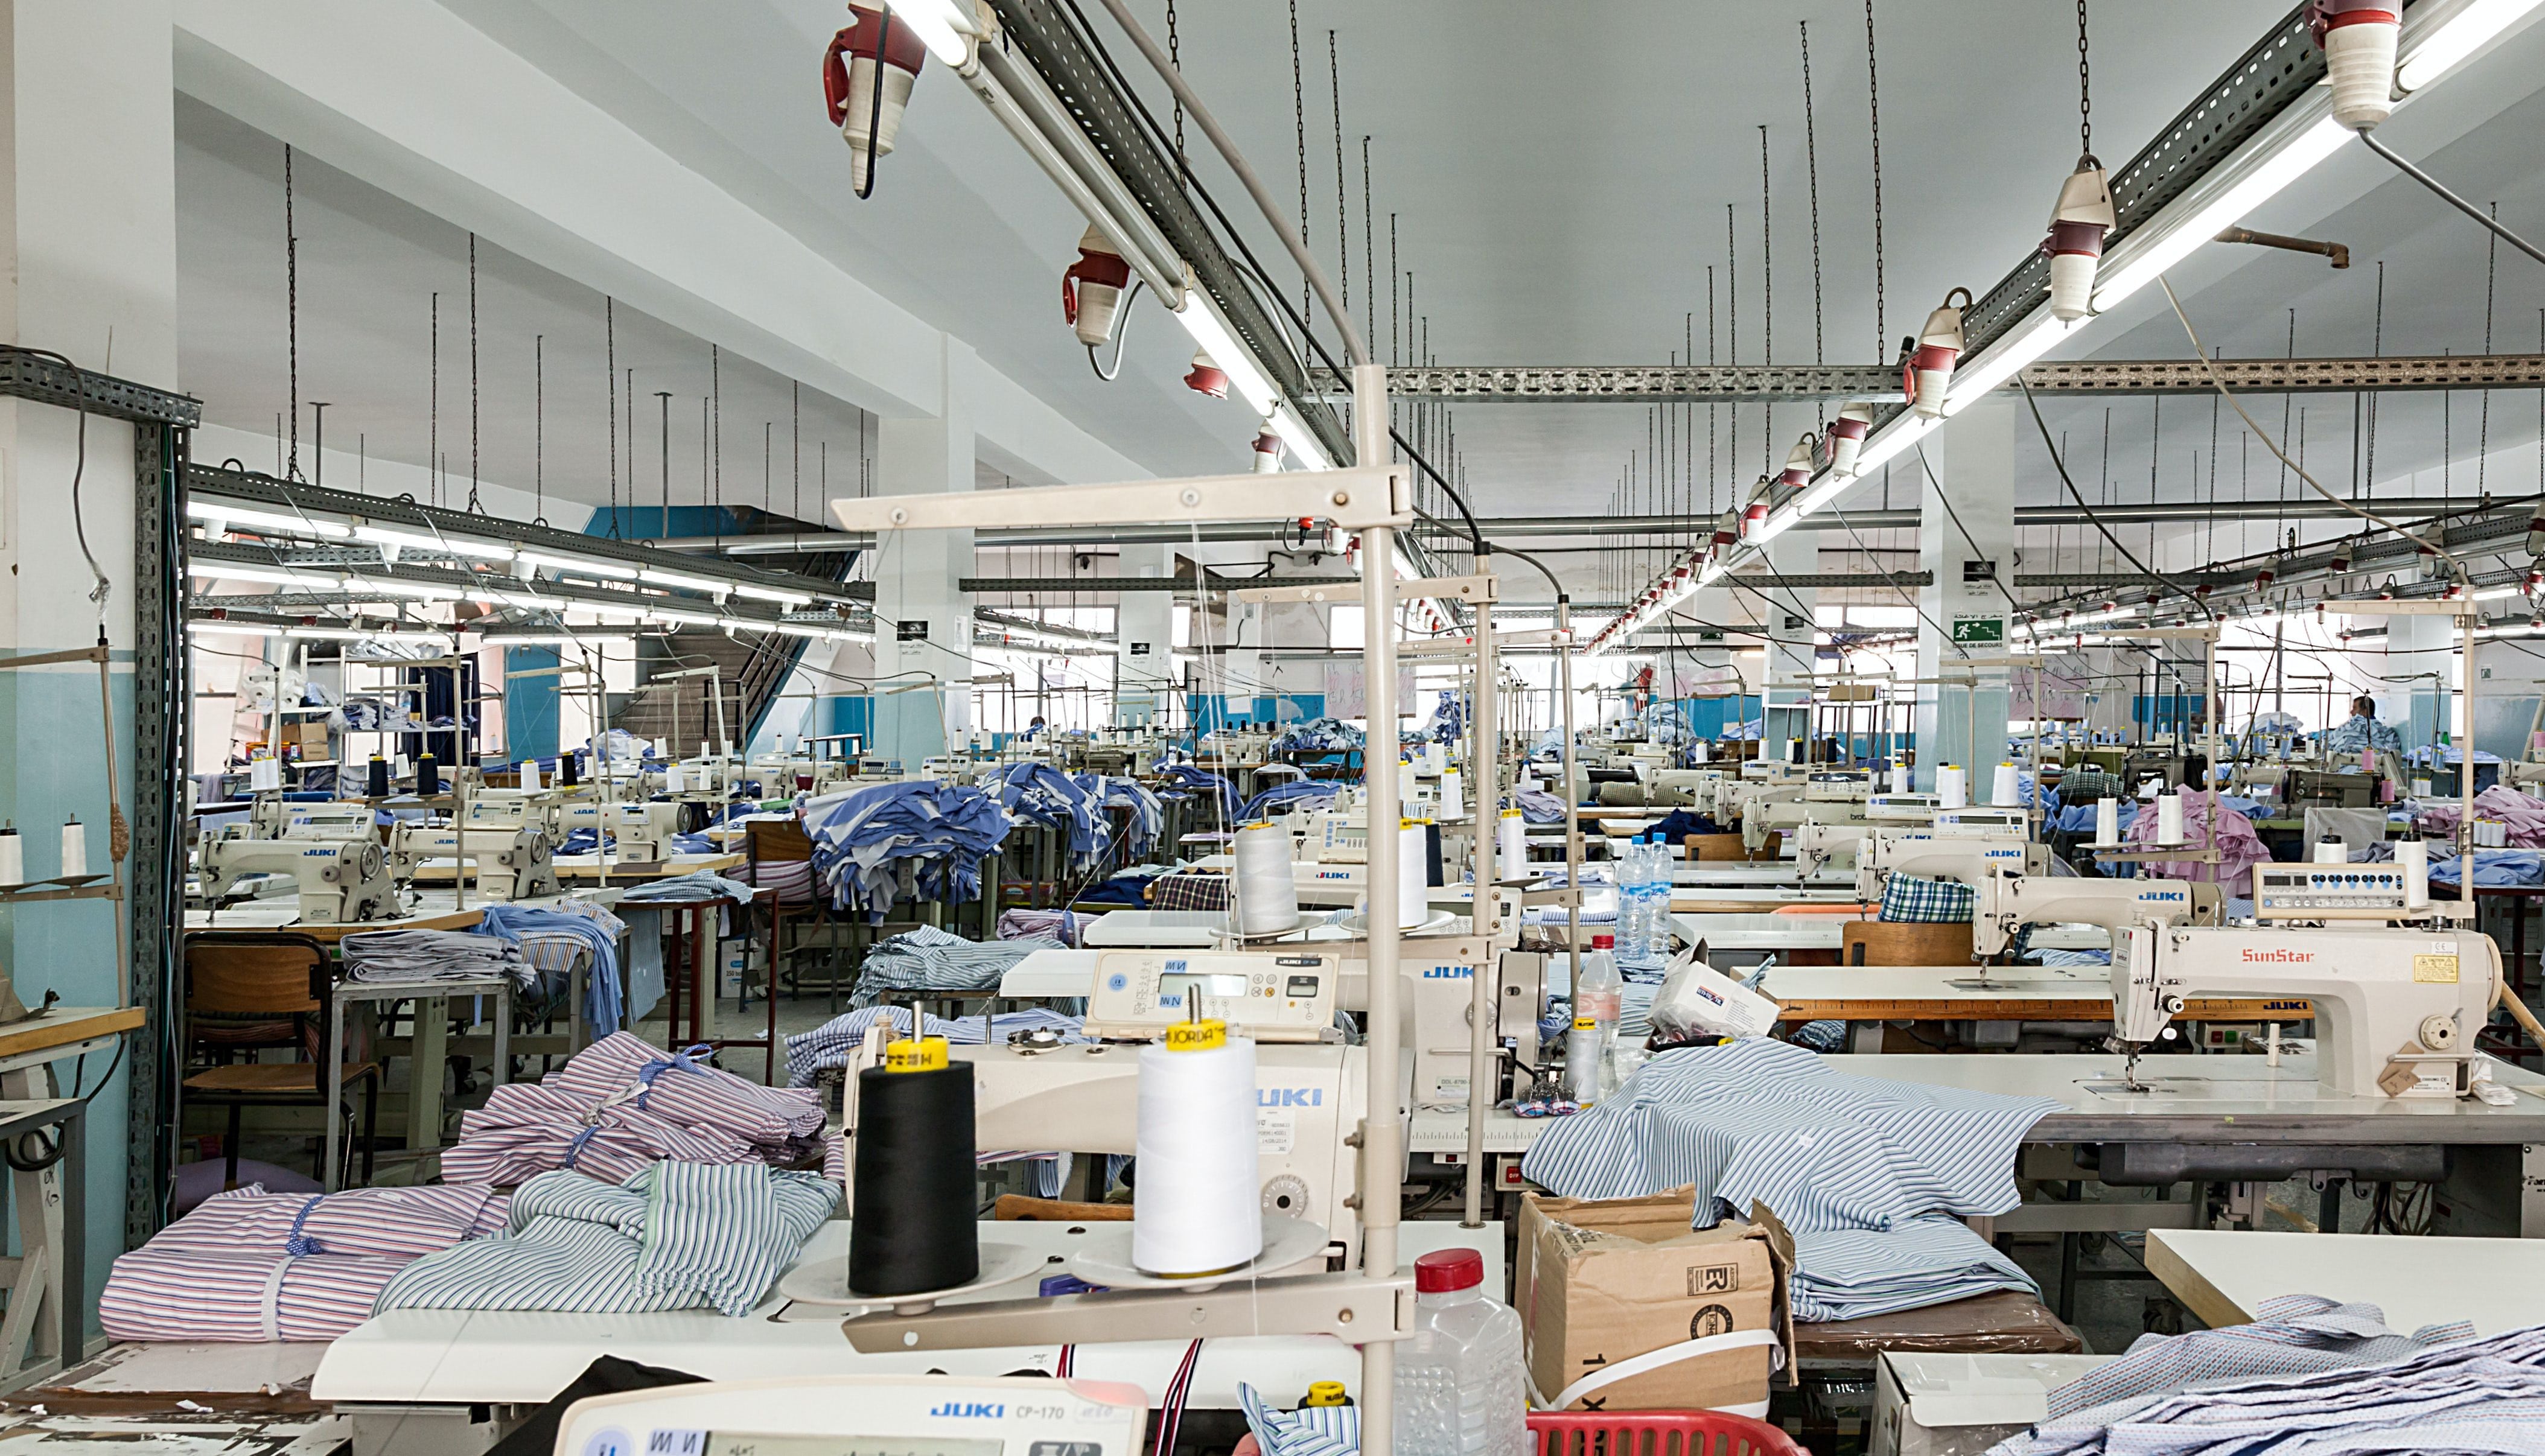 Apparel Factories in Vietnam Struggle With US Ban on Xinjiang Cotton